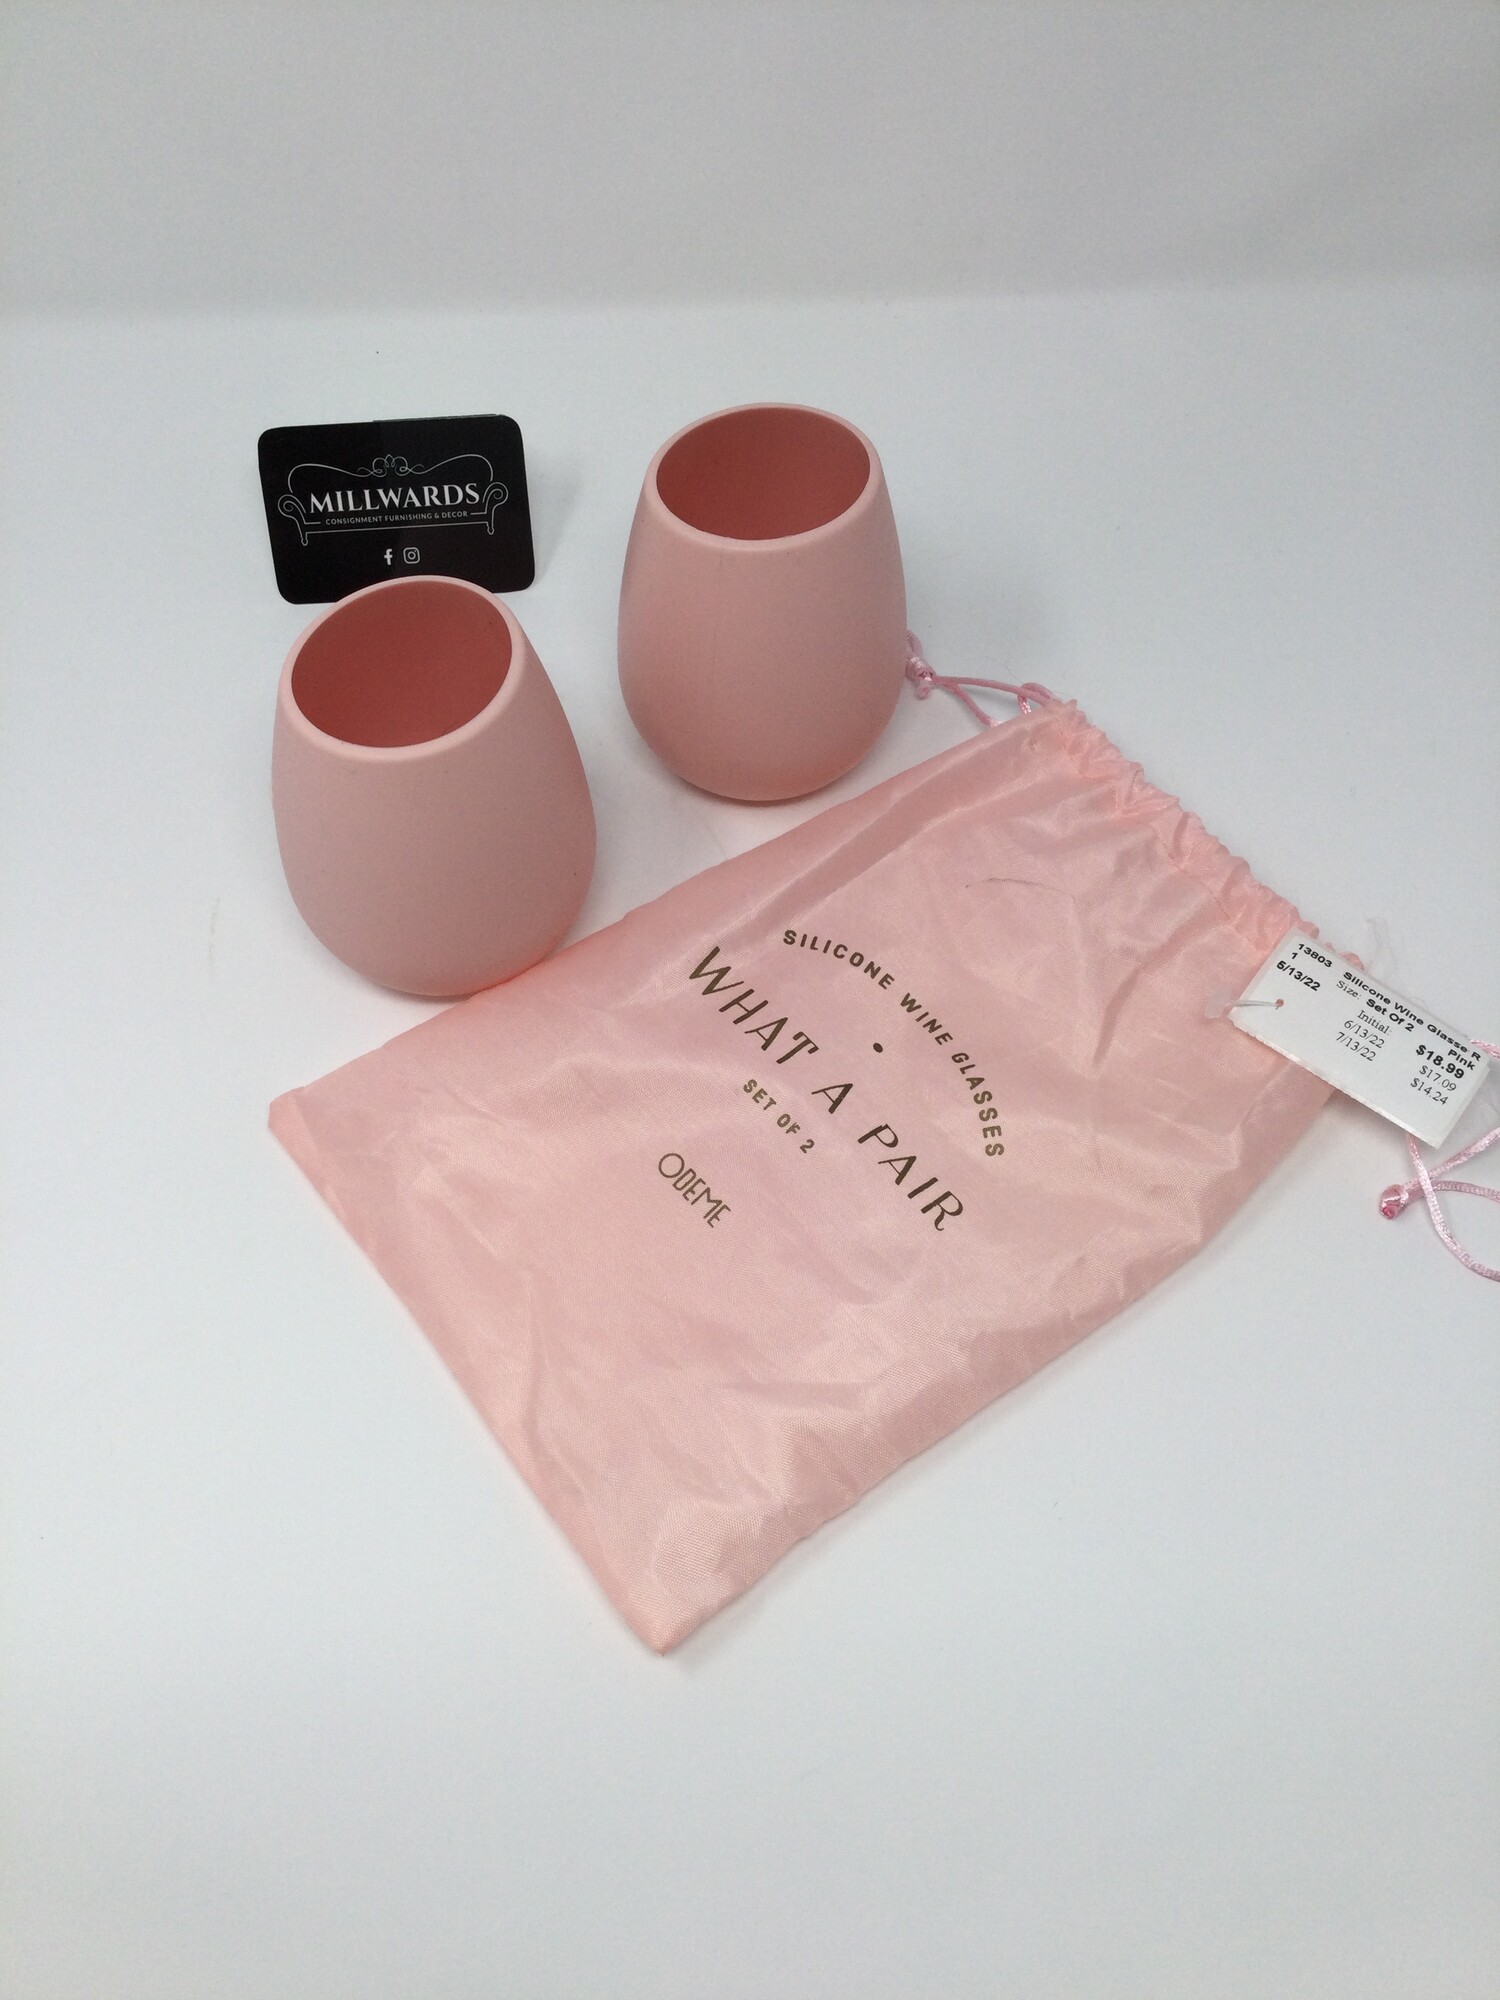 Silicone Wine Glasses  What A Pair
Pink
Set Of 2